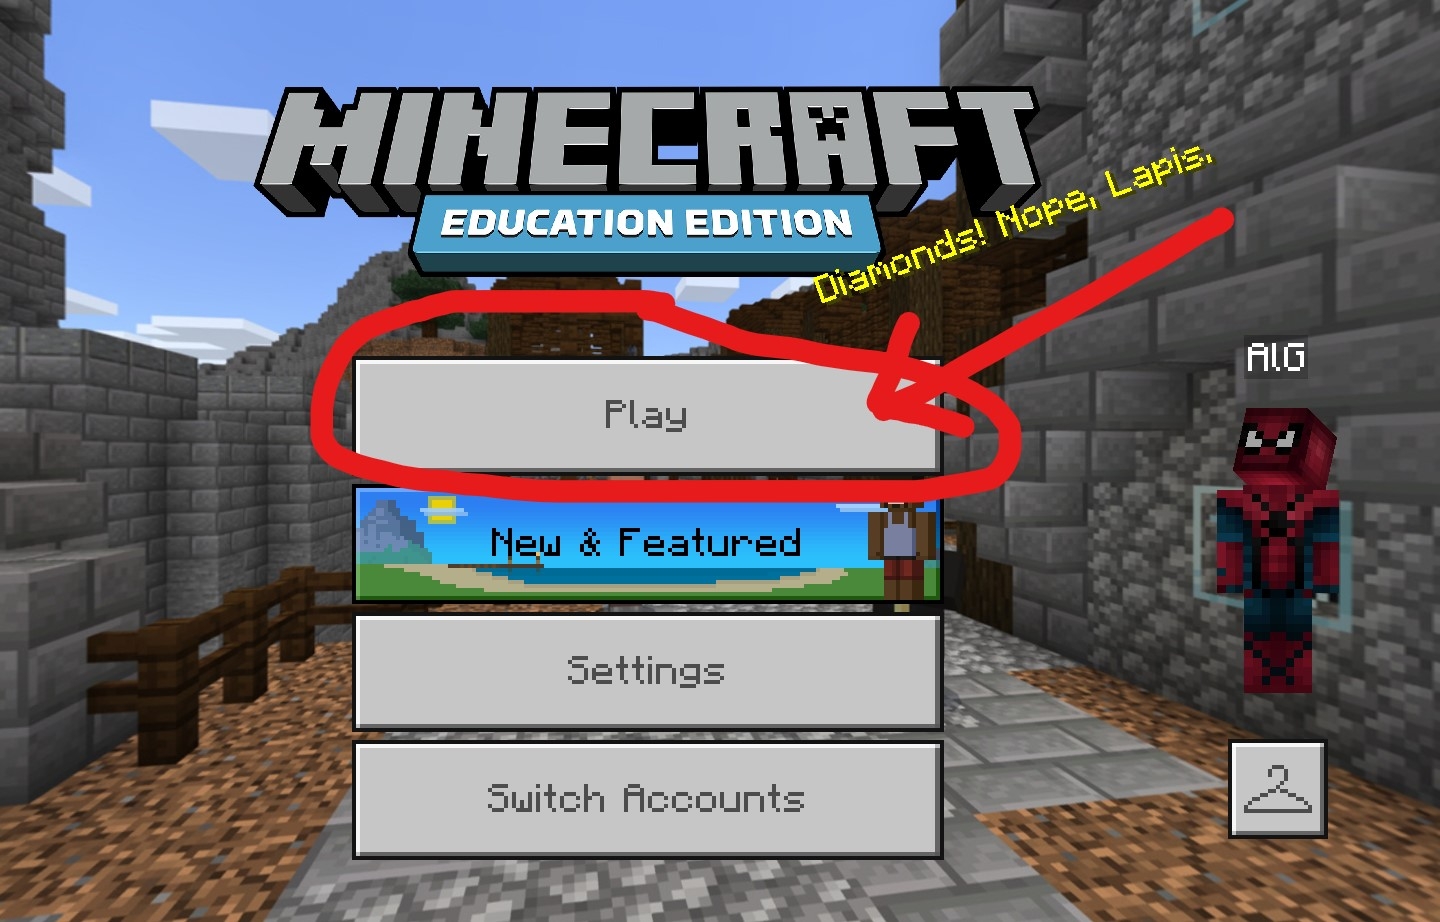 Why not to buy Minecraft Education Edition